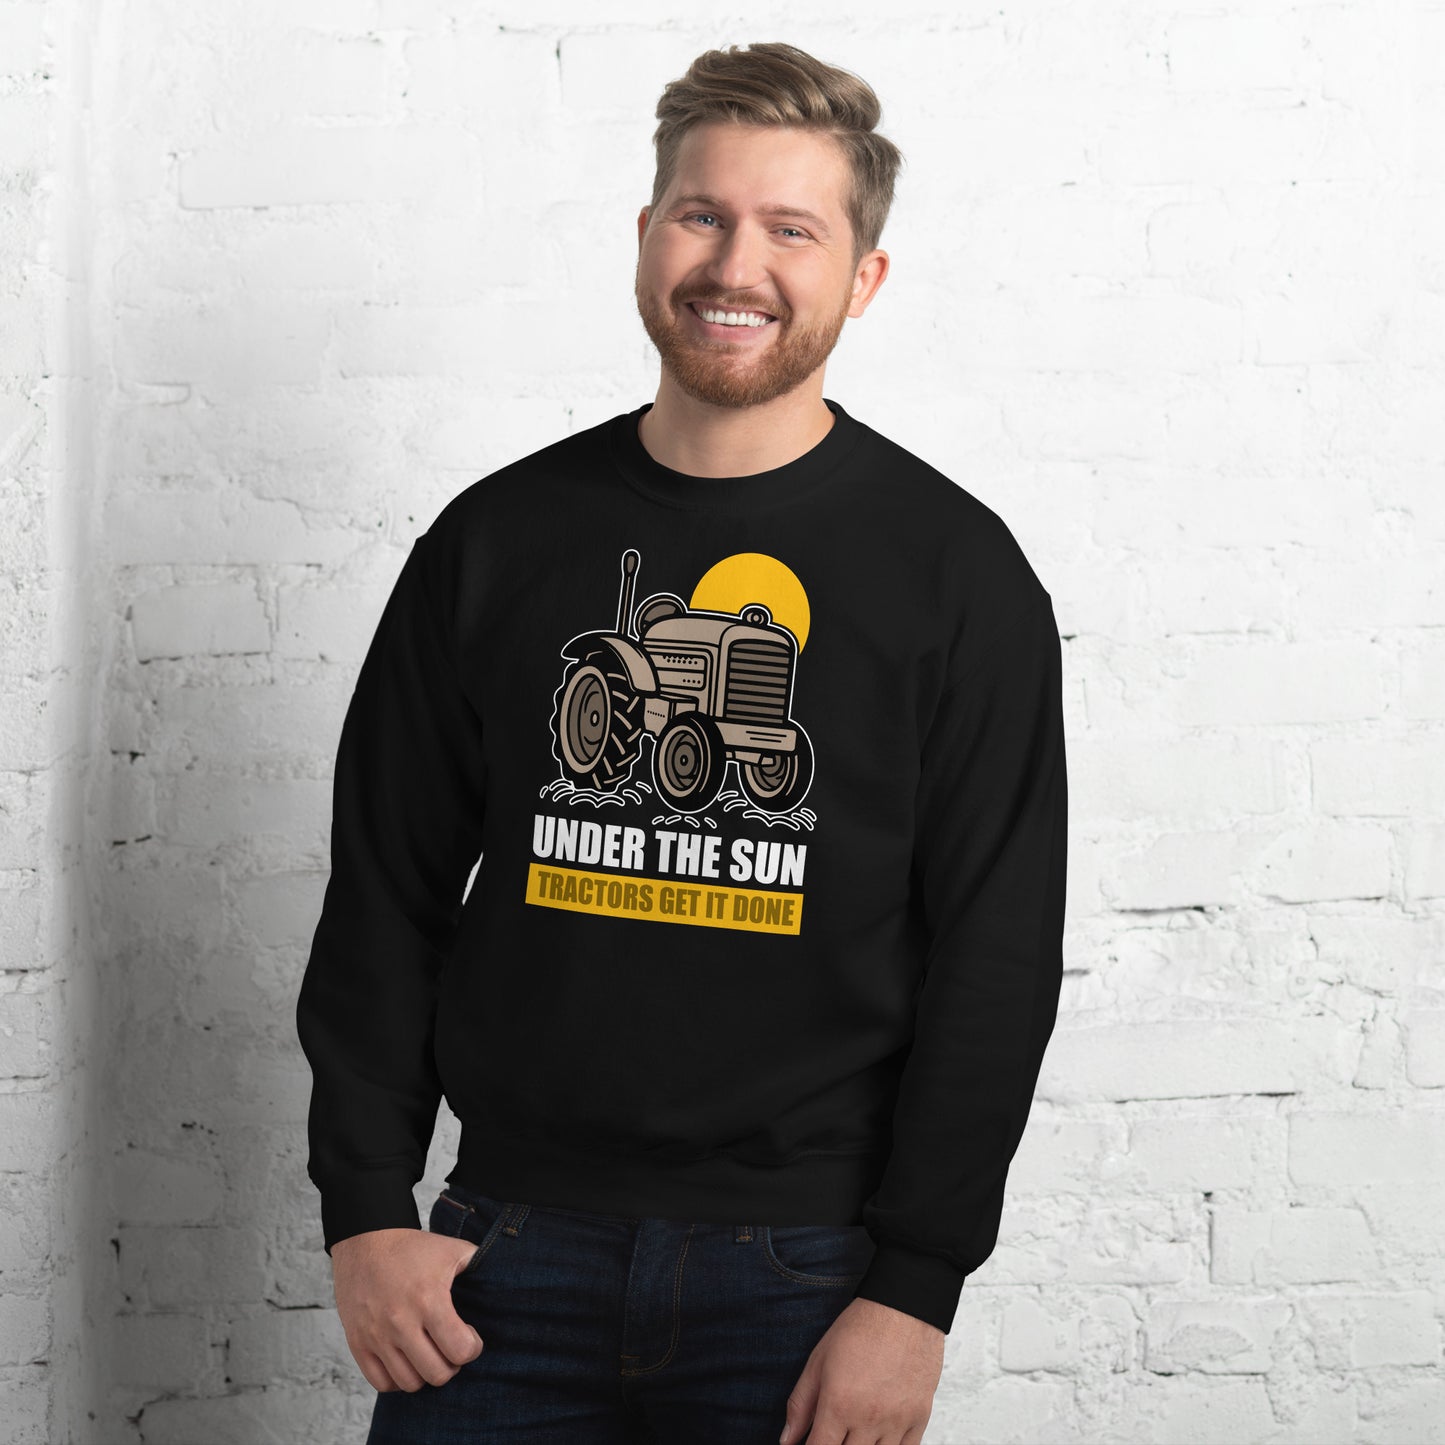 Under the Sun Tractors get it done Pullover